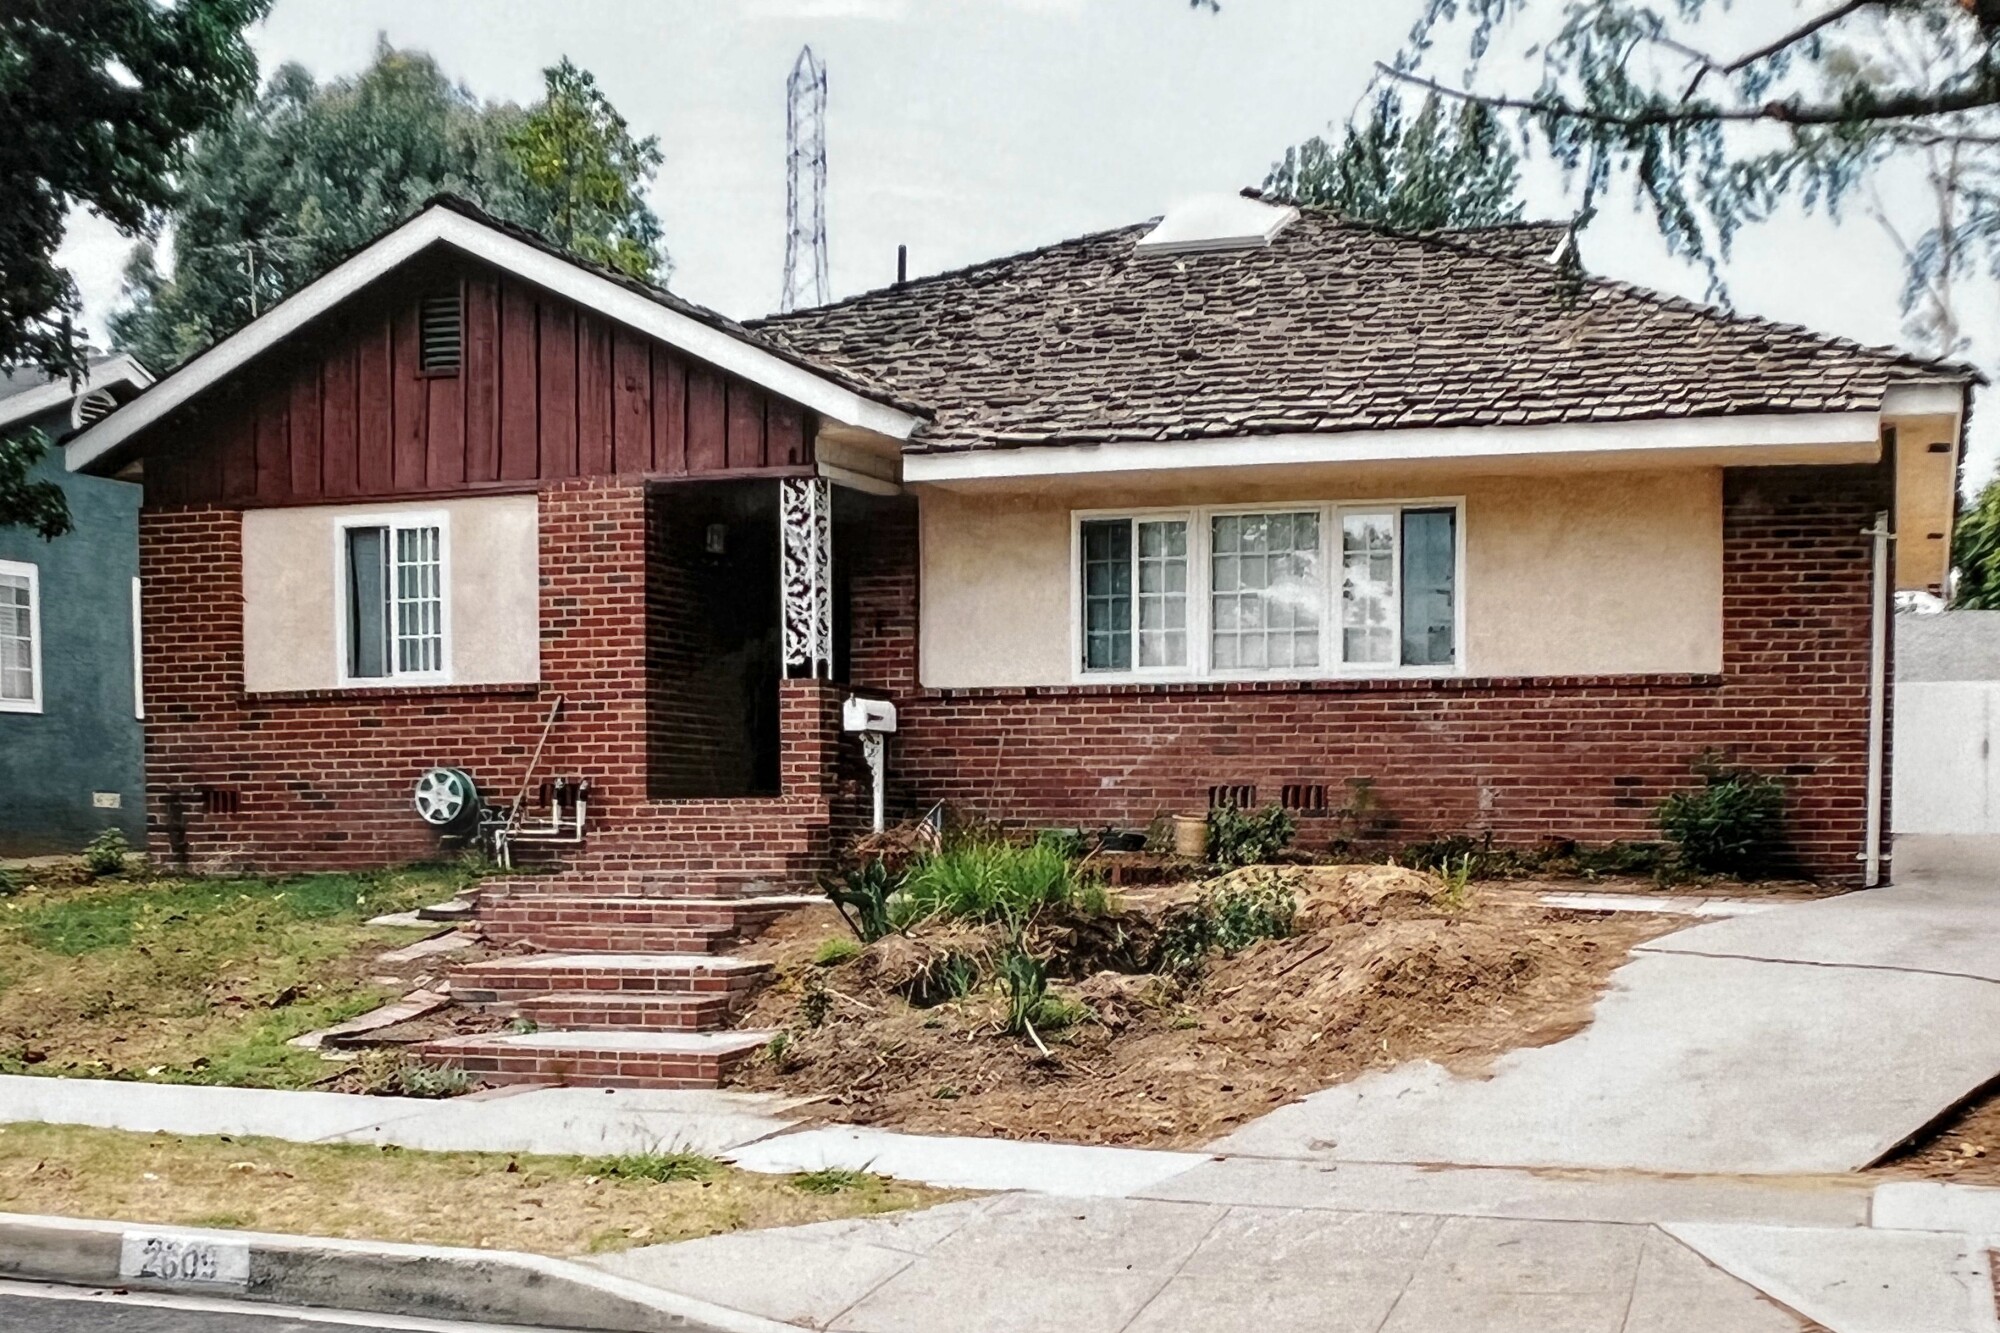 Mike Garcia's home in 2007, before he replaced the front lawn.